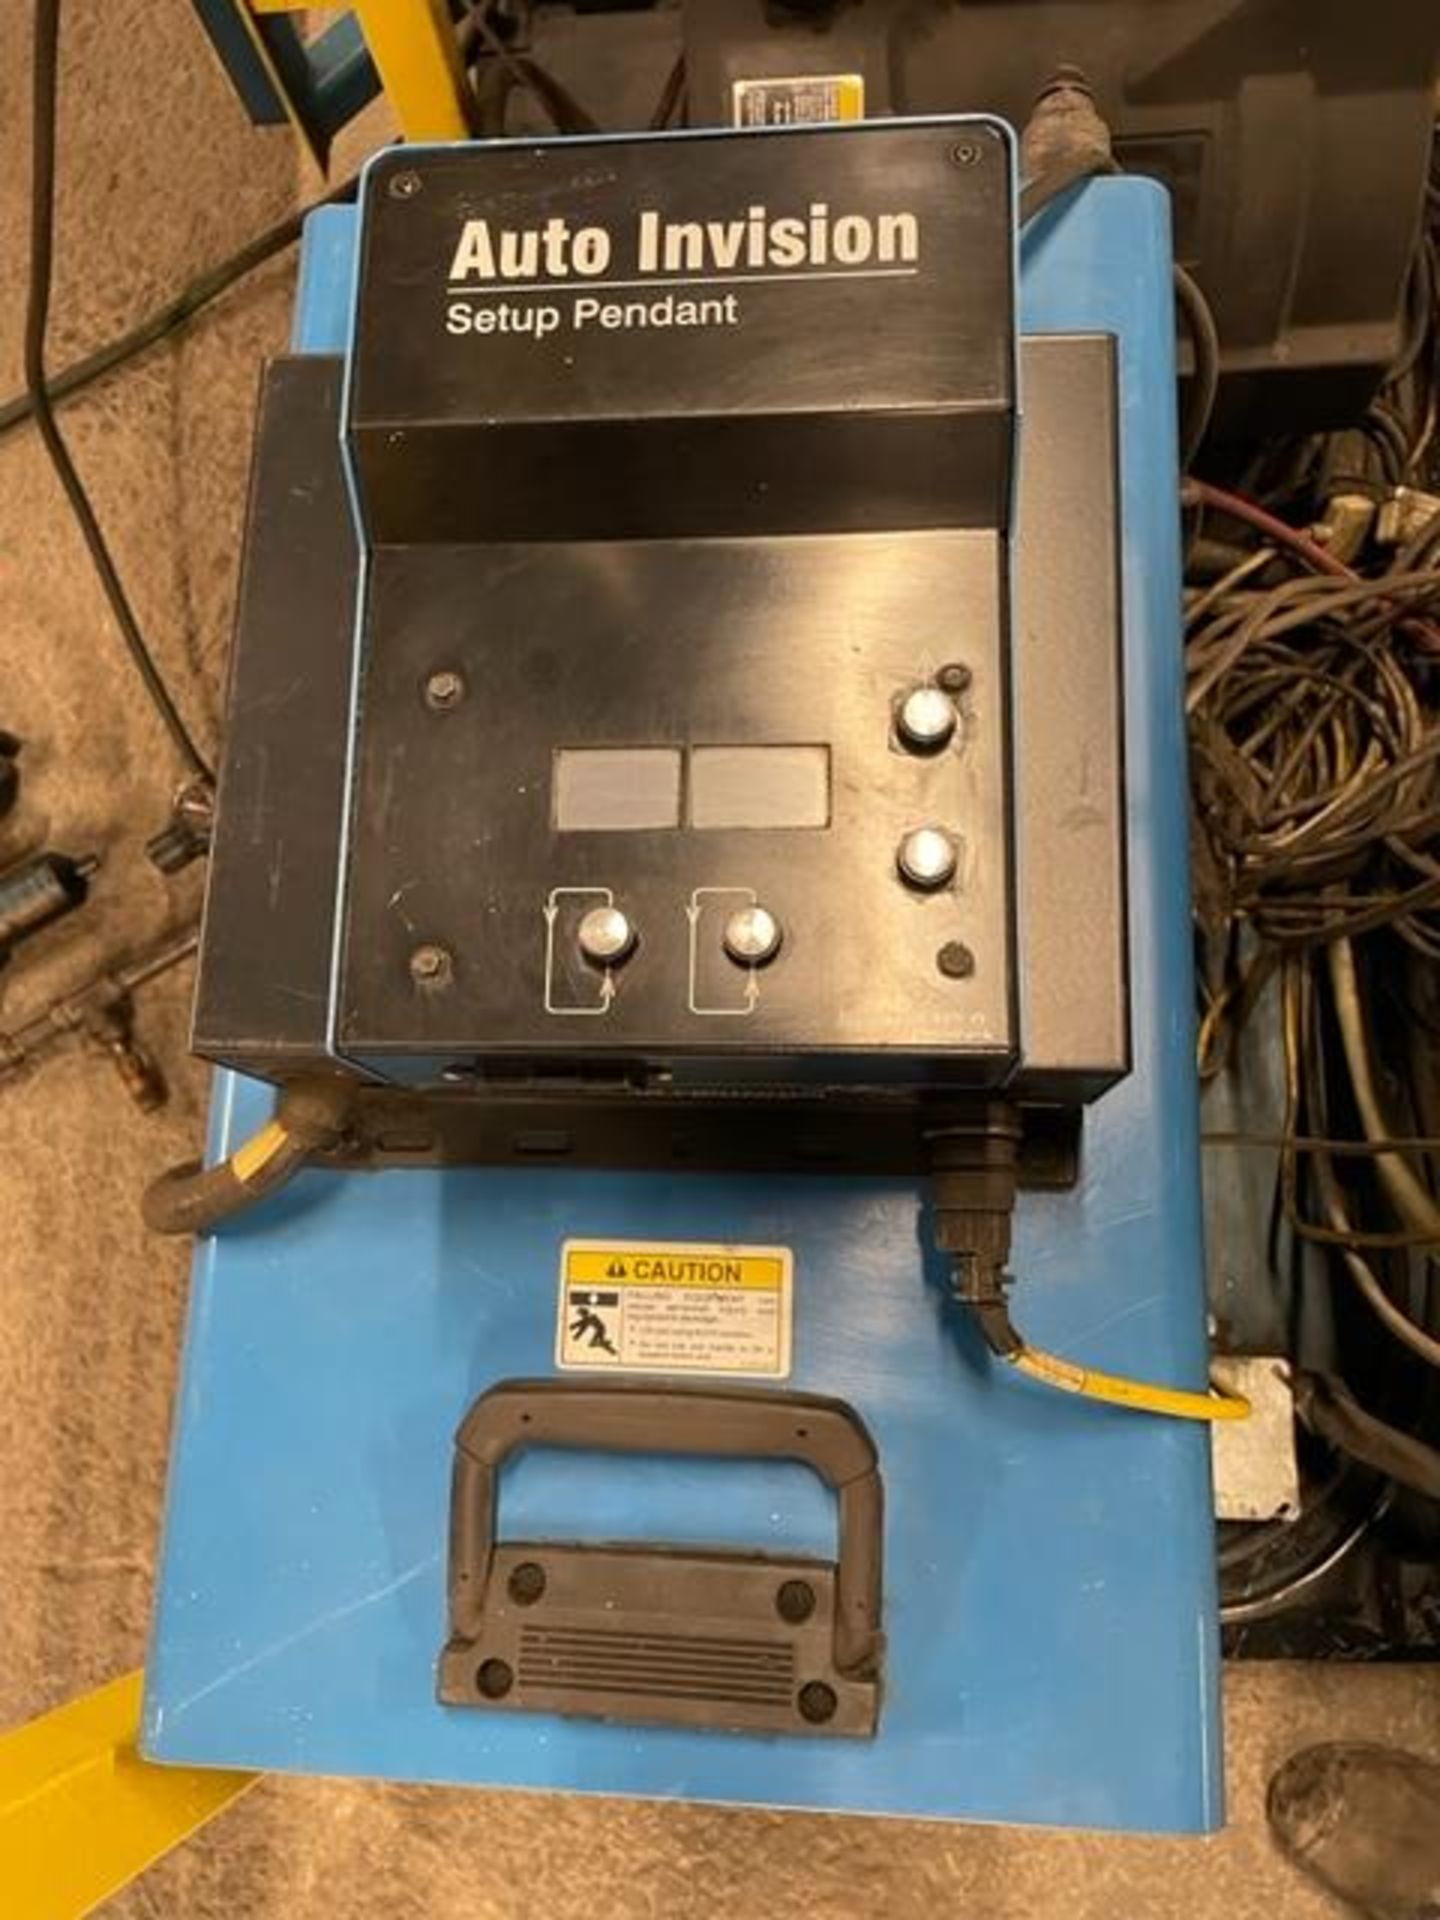 ABB Robot IRB 1400 M98 Welding Robot Cell with Controller & Miller Auto Invision Mig Welder Teach - Image 4 of 8